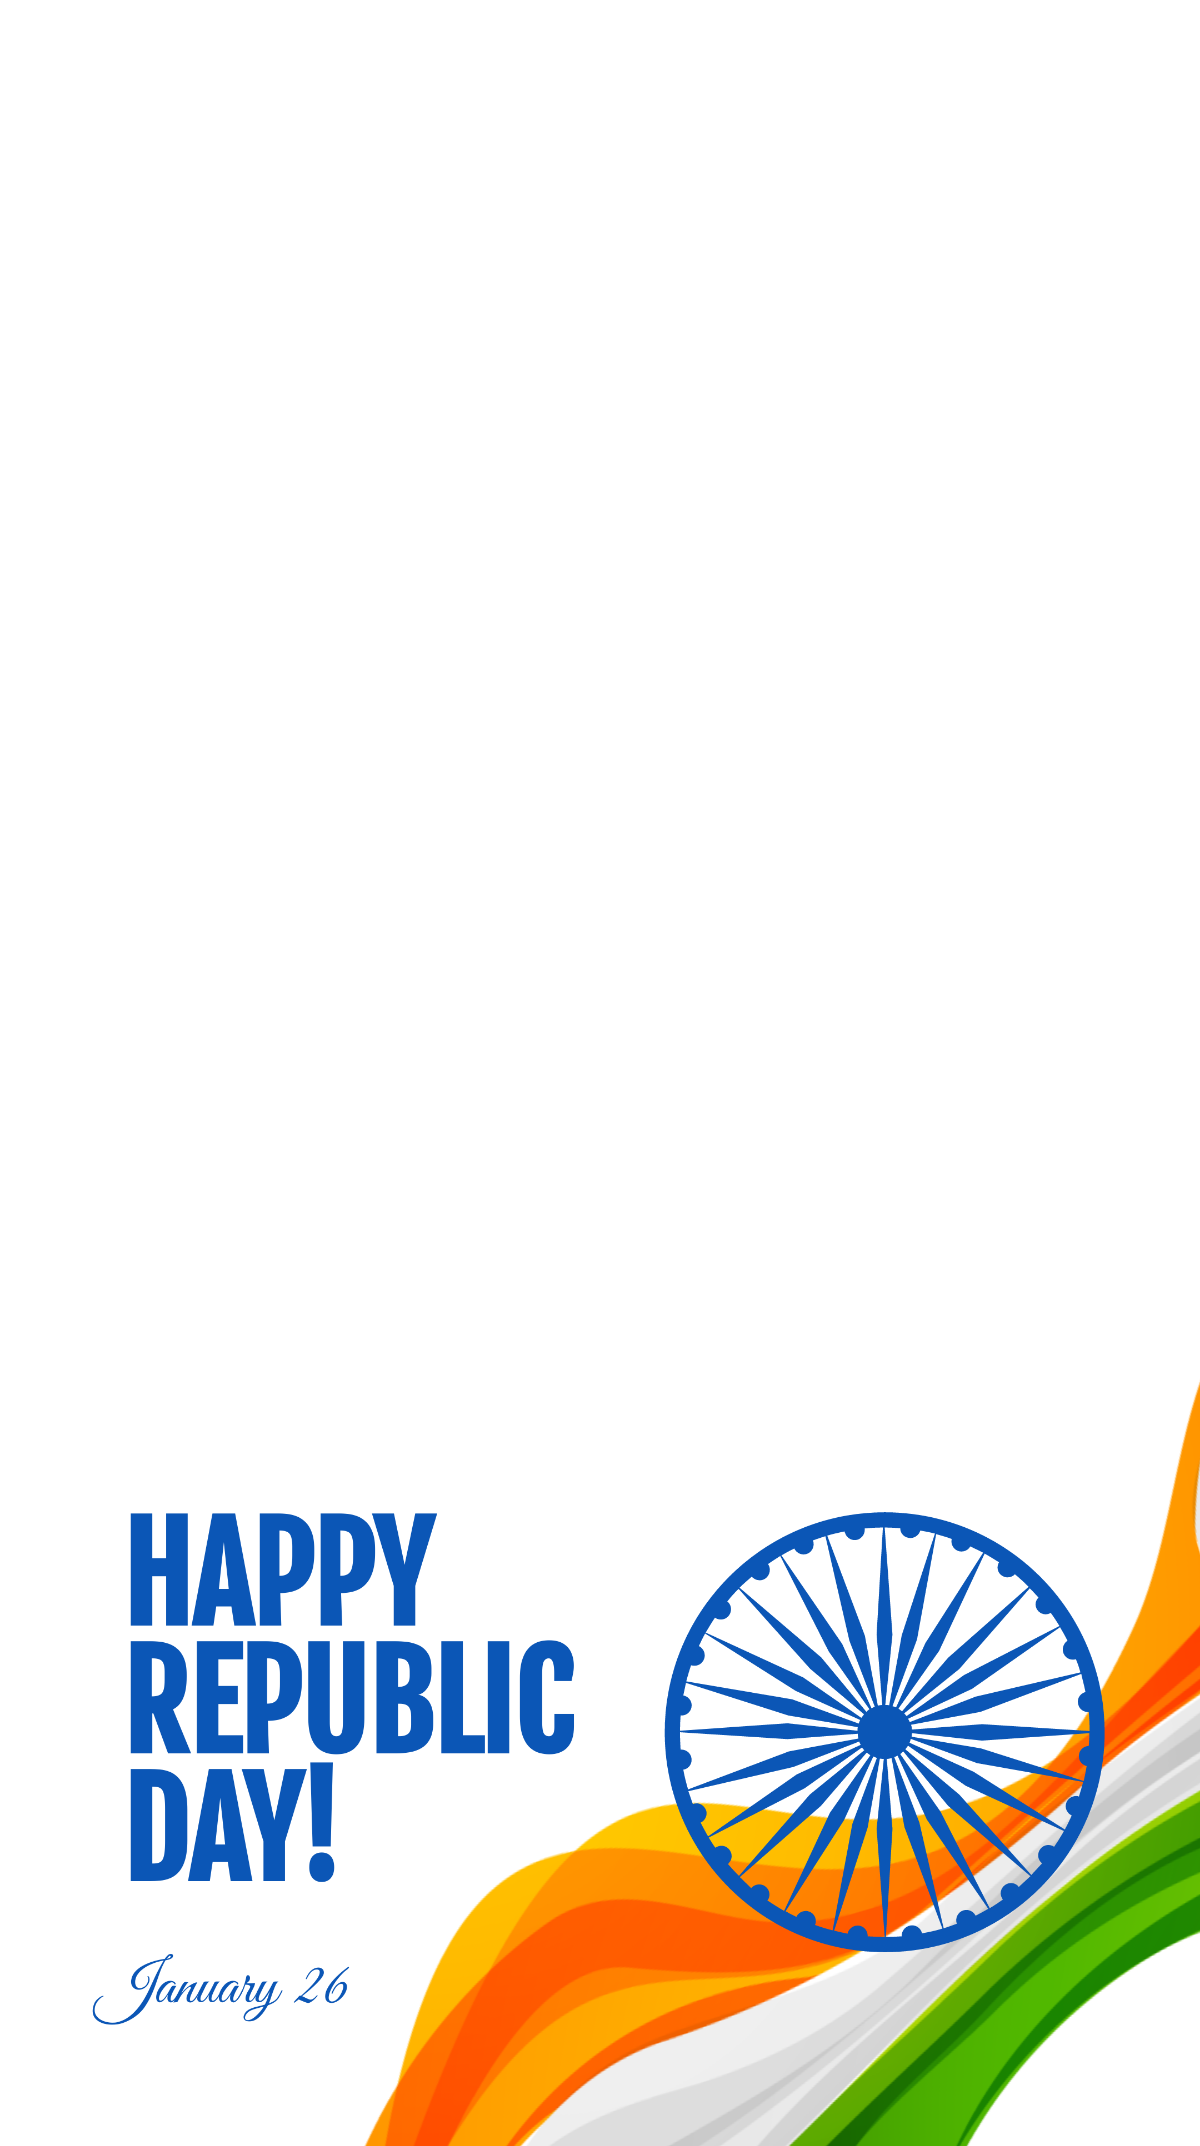 Happy Republic Day Snapchat Geofilter Template